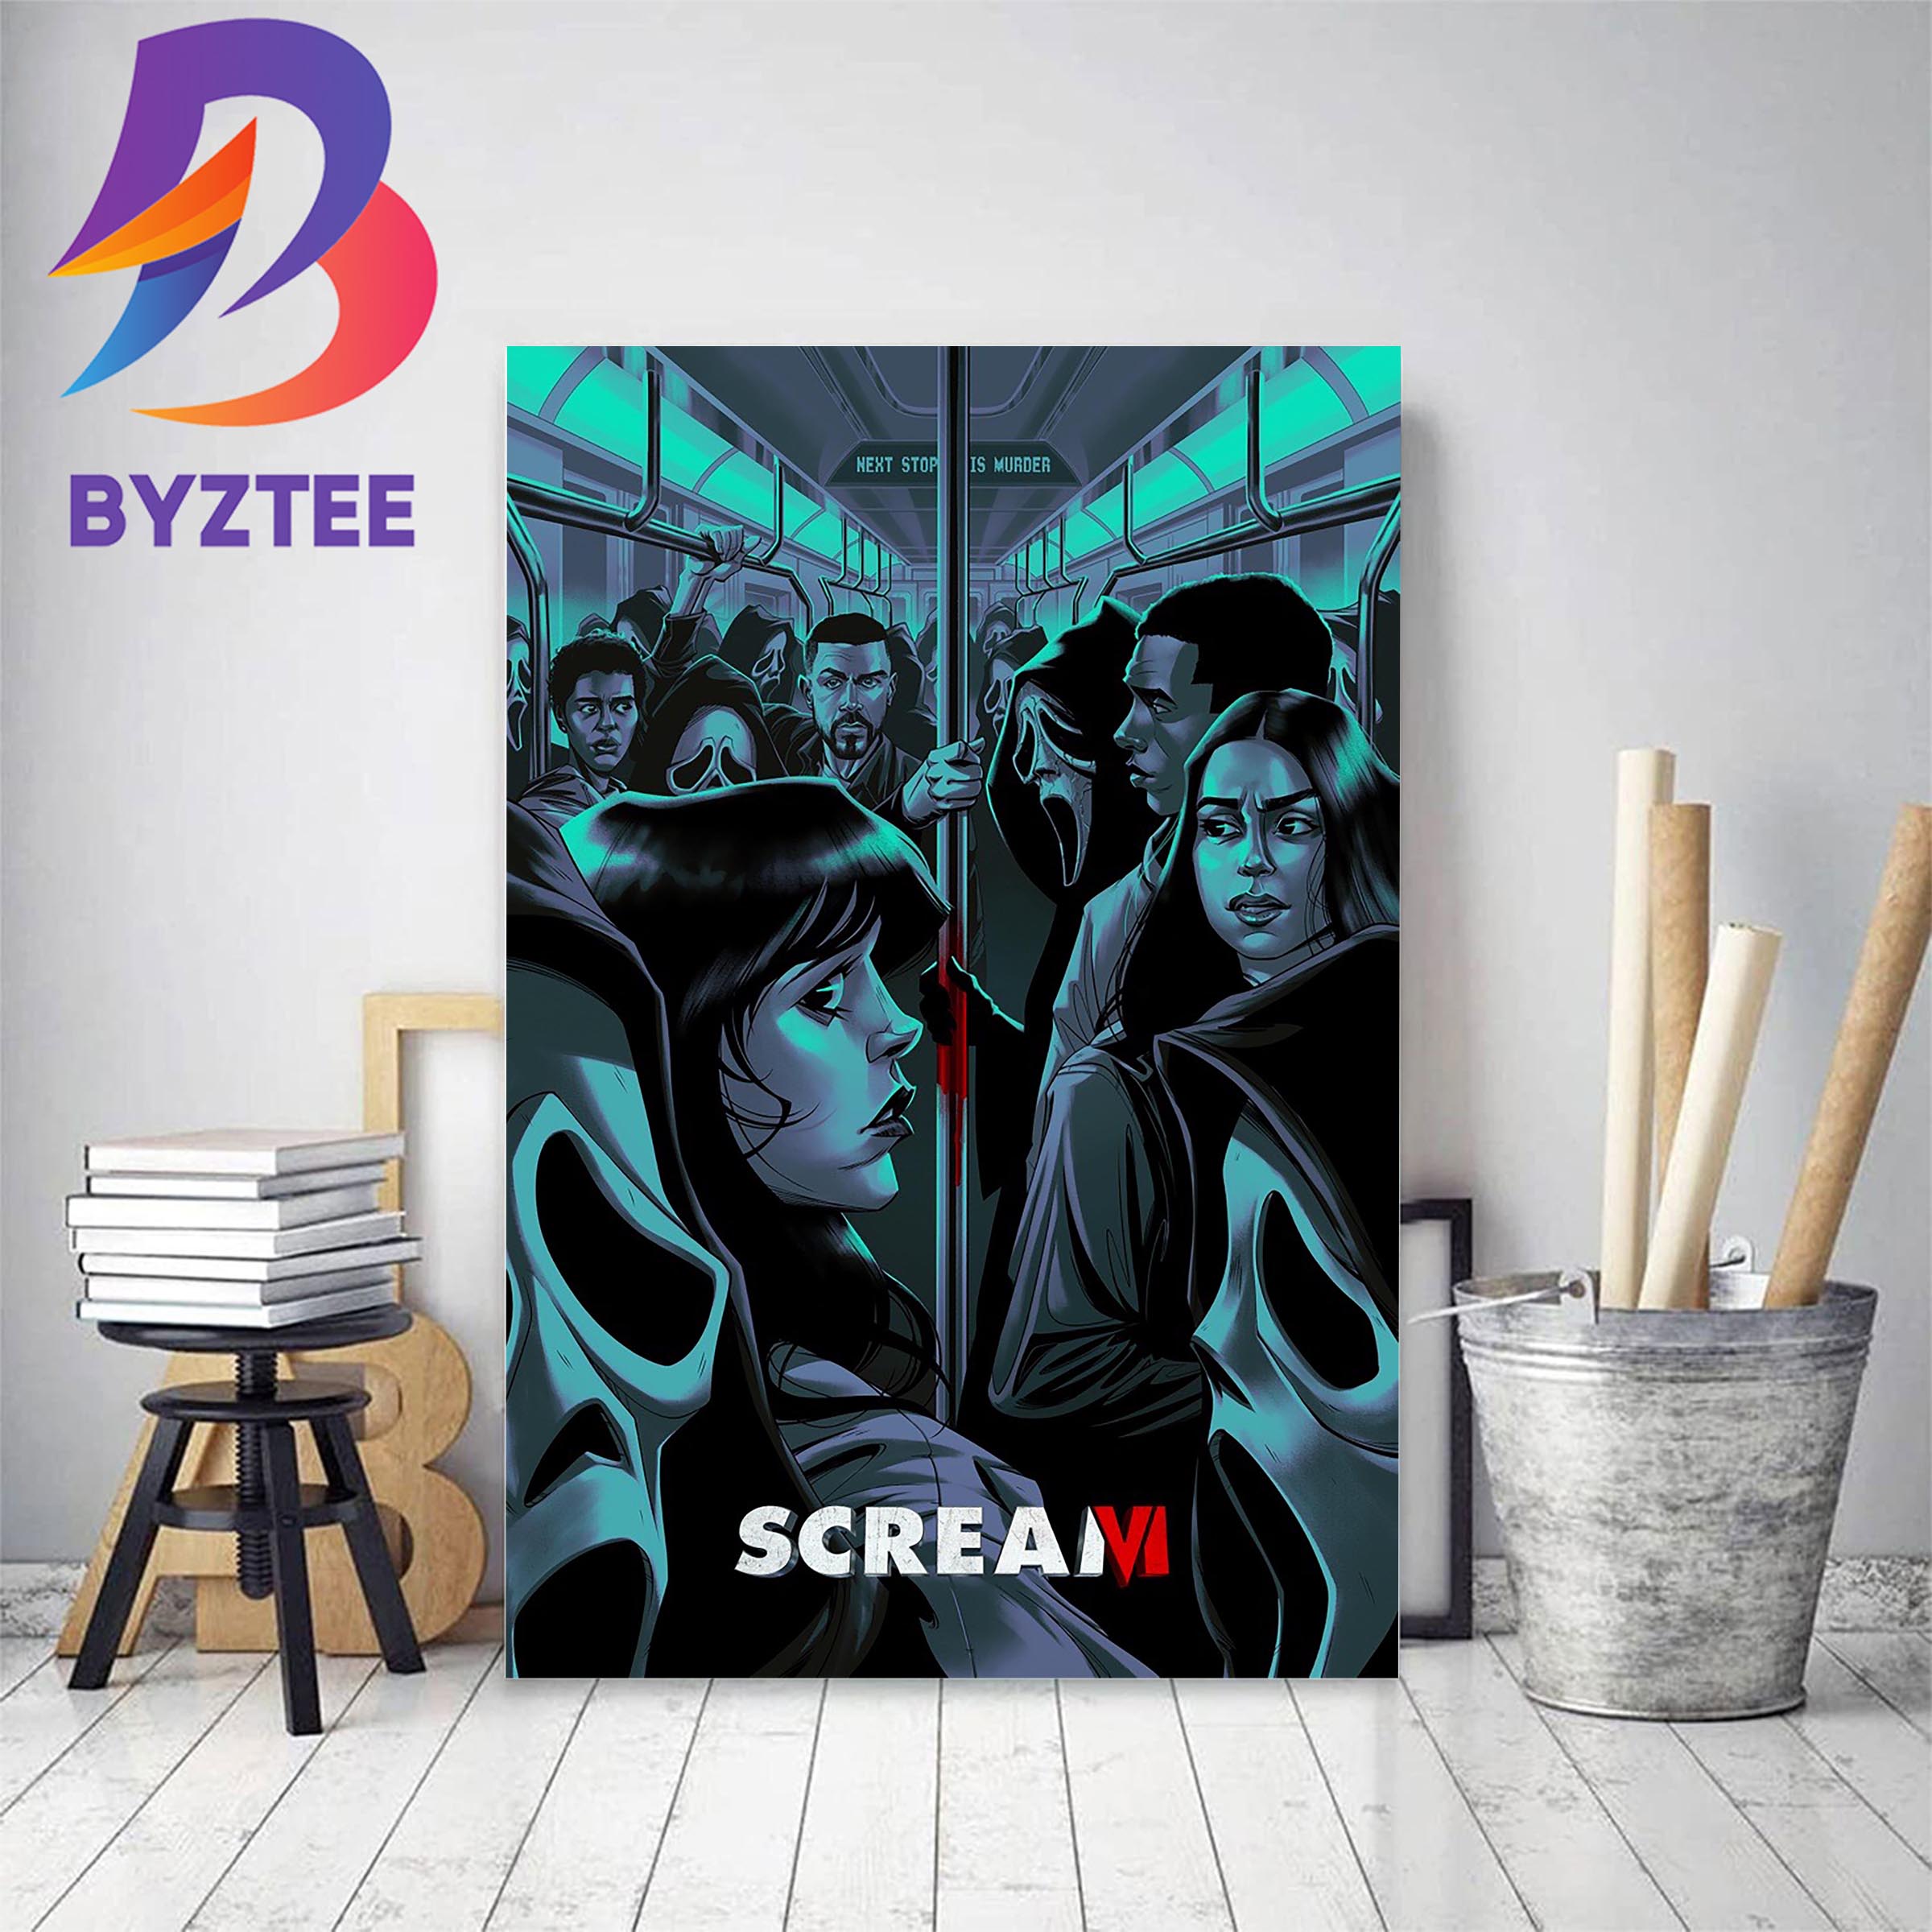 Scream VI Gets Official New Poster